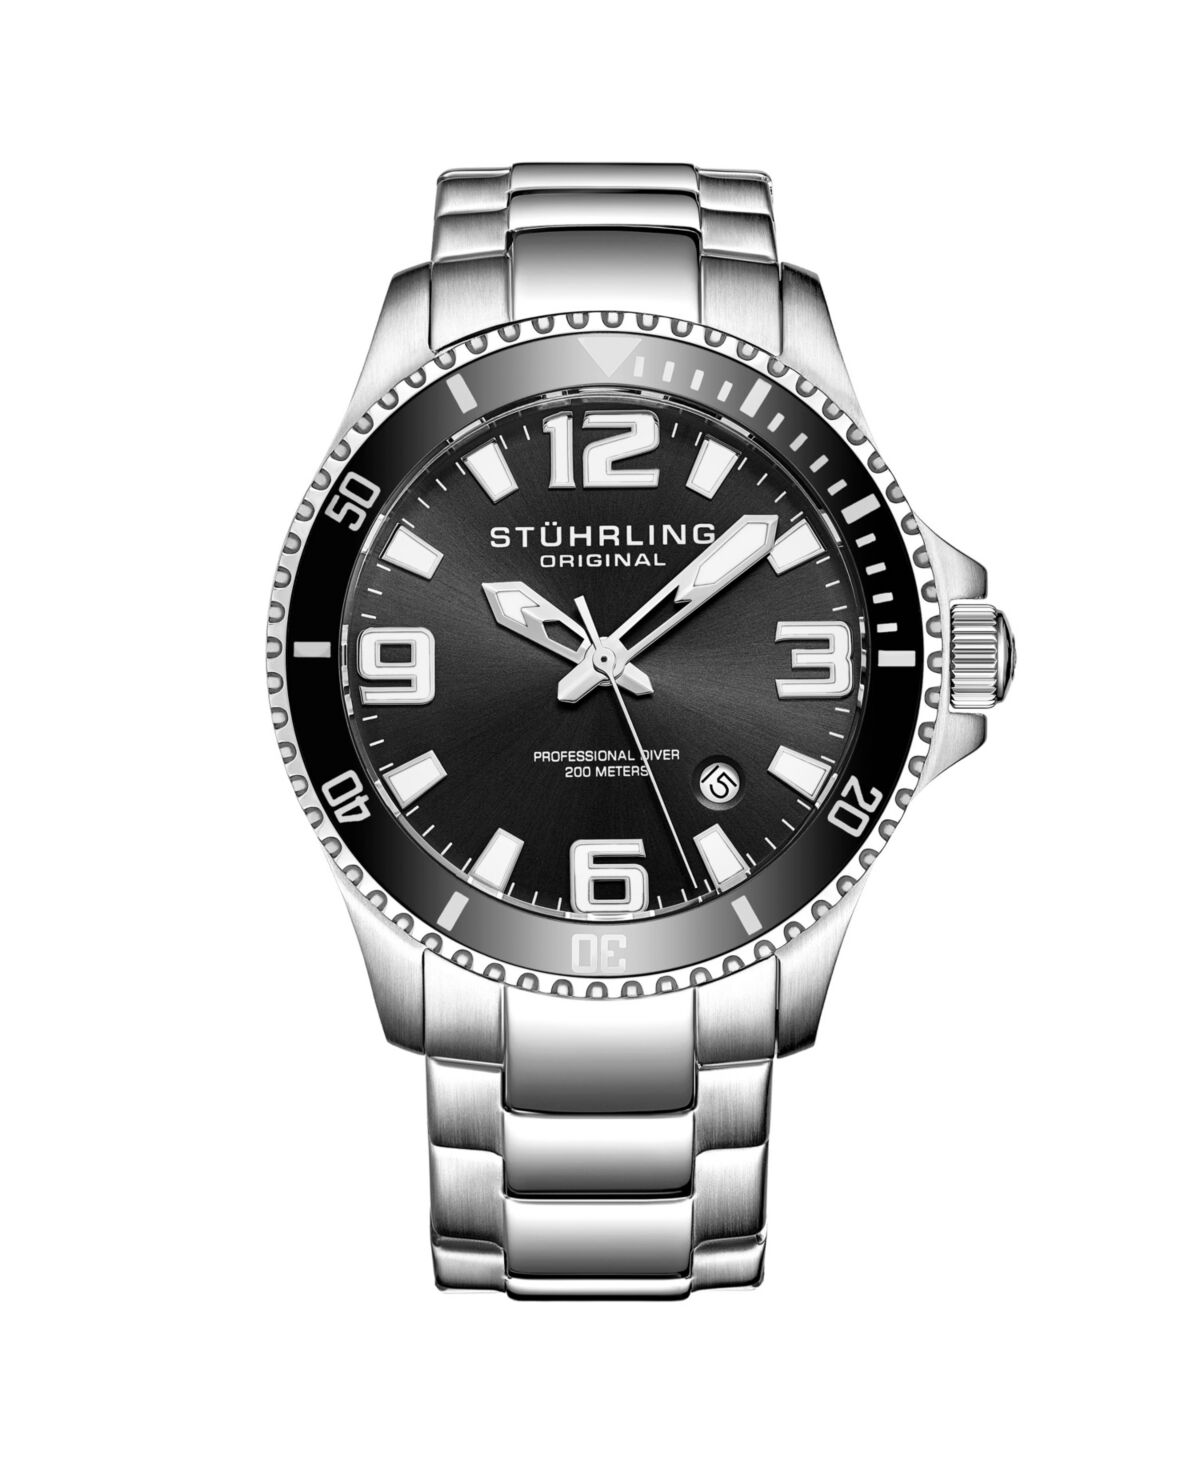 Stuhrling Men's Stainless Steel Case on Link Bracelet, Black Bezel Watch, Black Dial, with White and Silver Accents - Black